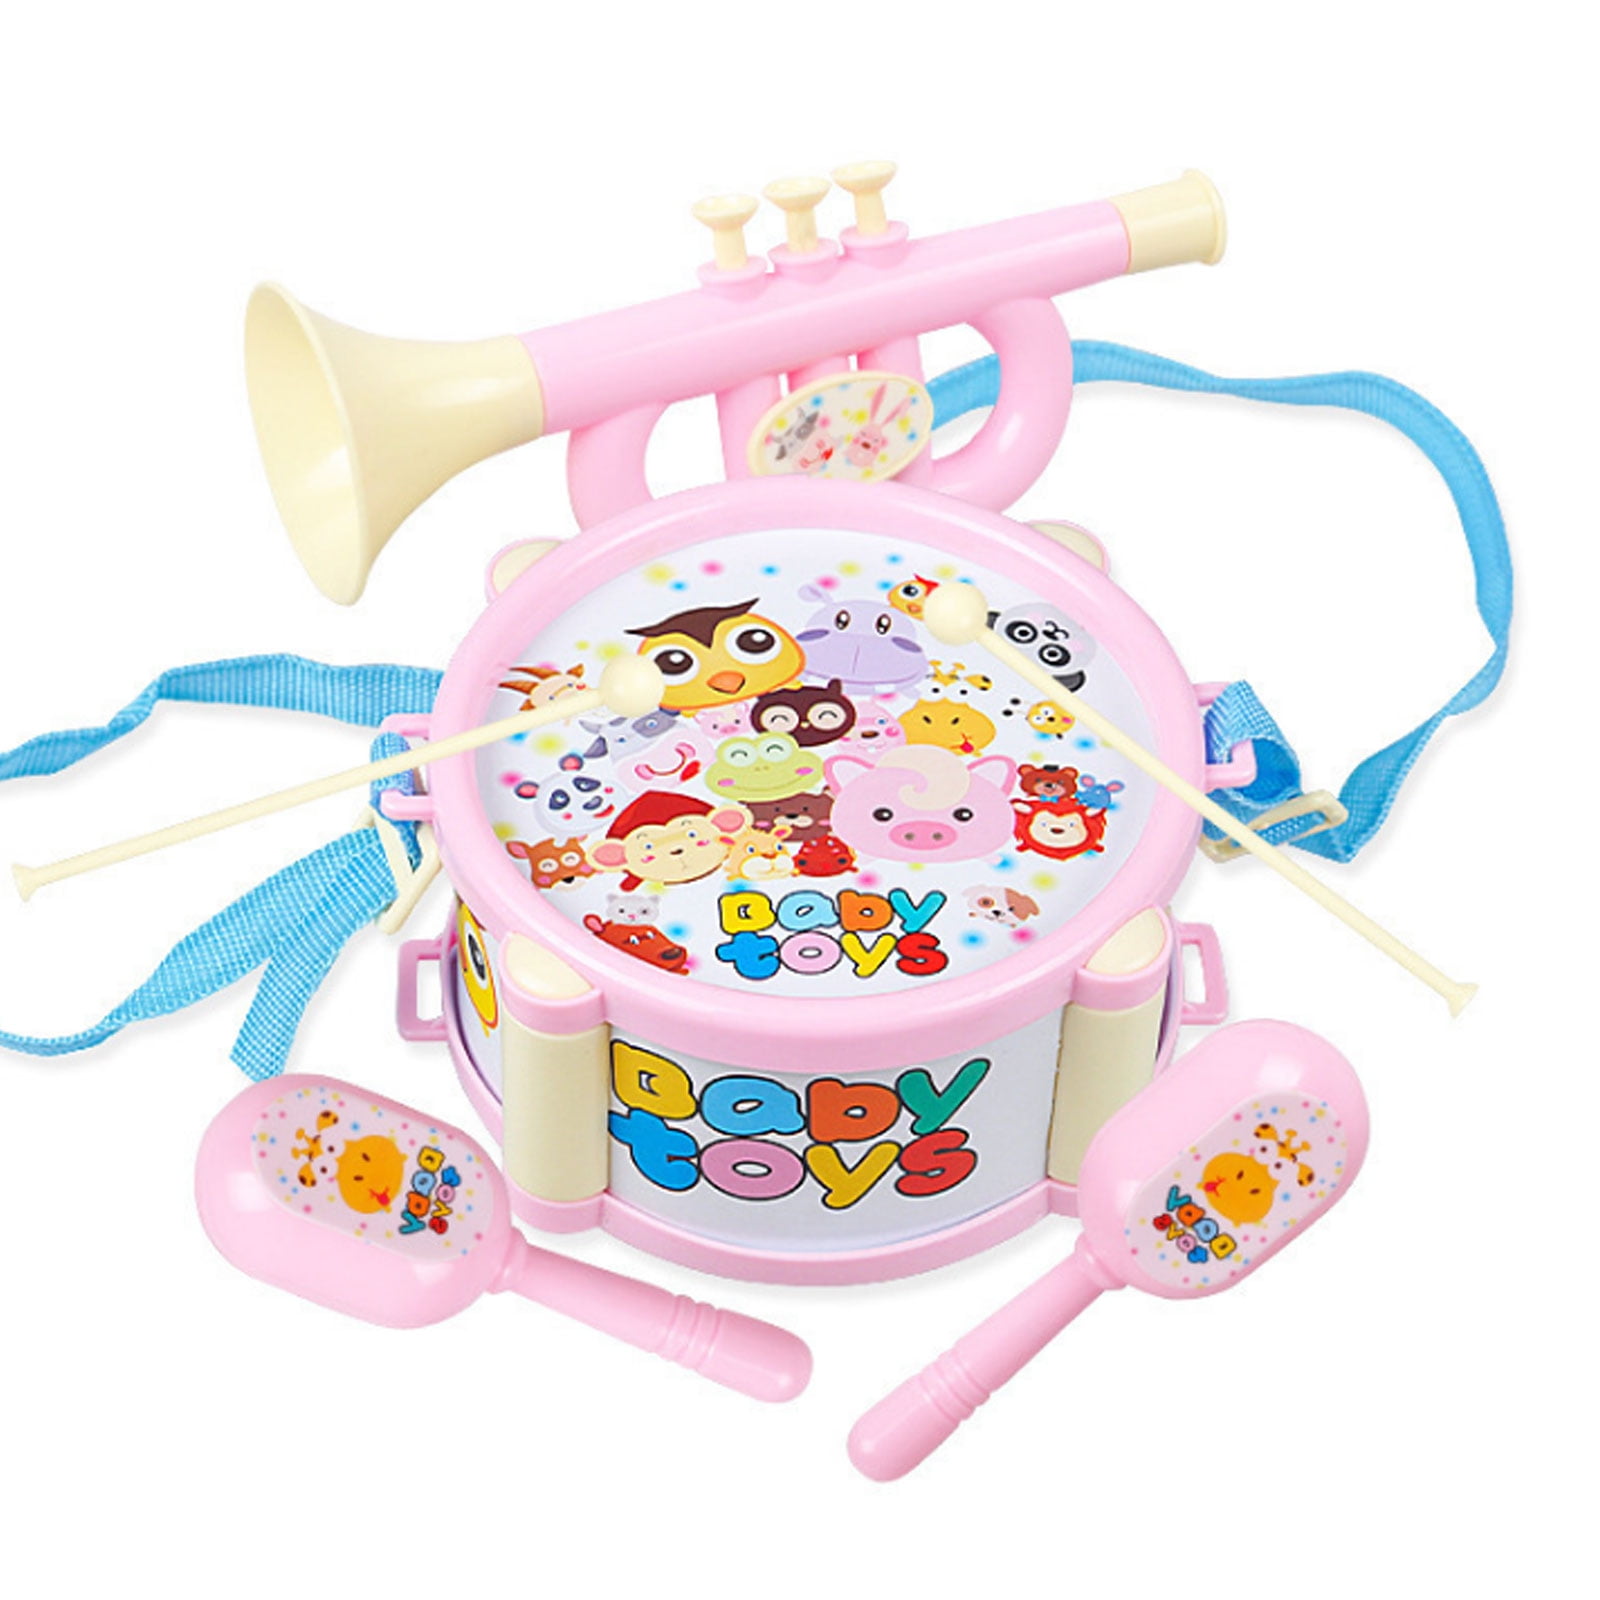 Details about   6X/Set Baby Boy Girl Drum Musical Instruments Kids Band Kit Children Toy Gifts F 